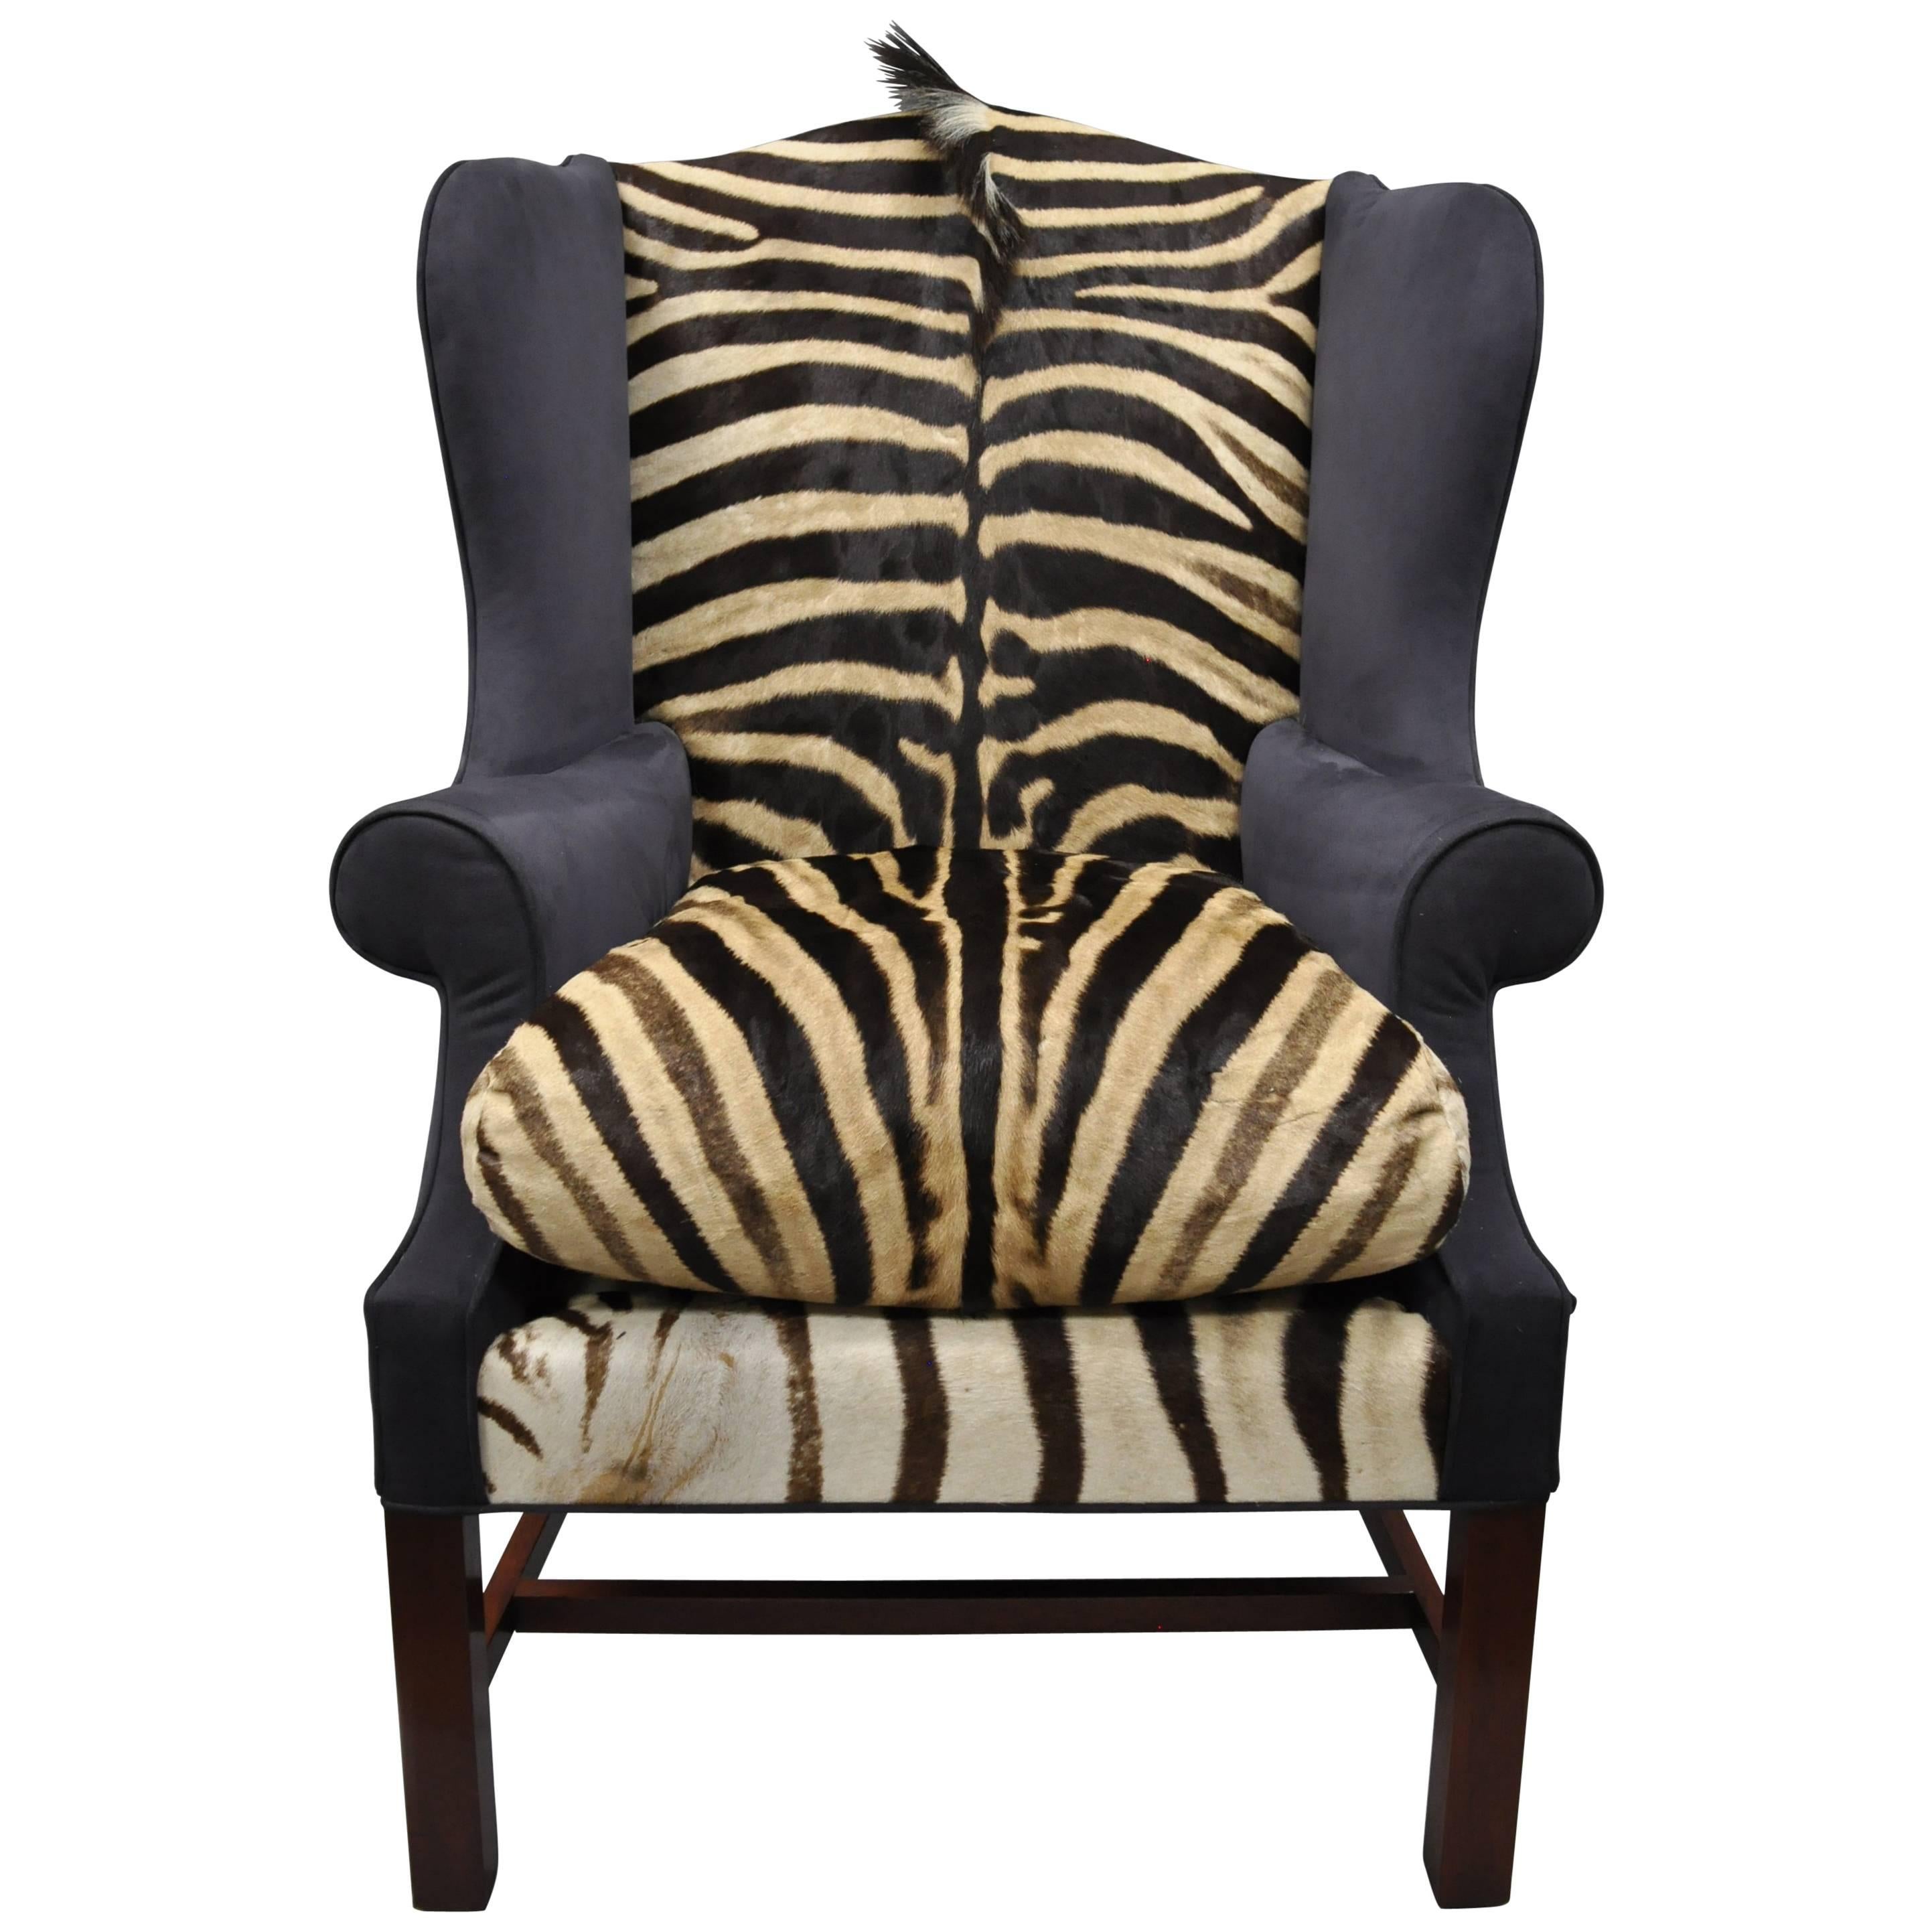 Zebra Hide Blue Suede Mahogany English Georgian Style Wingback Library Chair For Sale